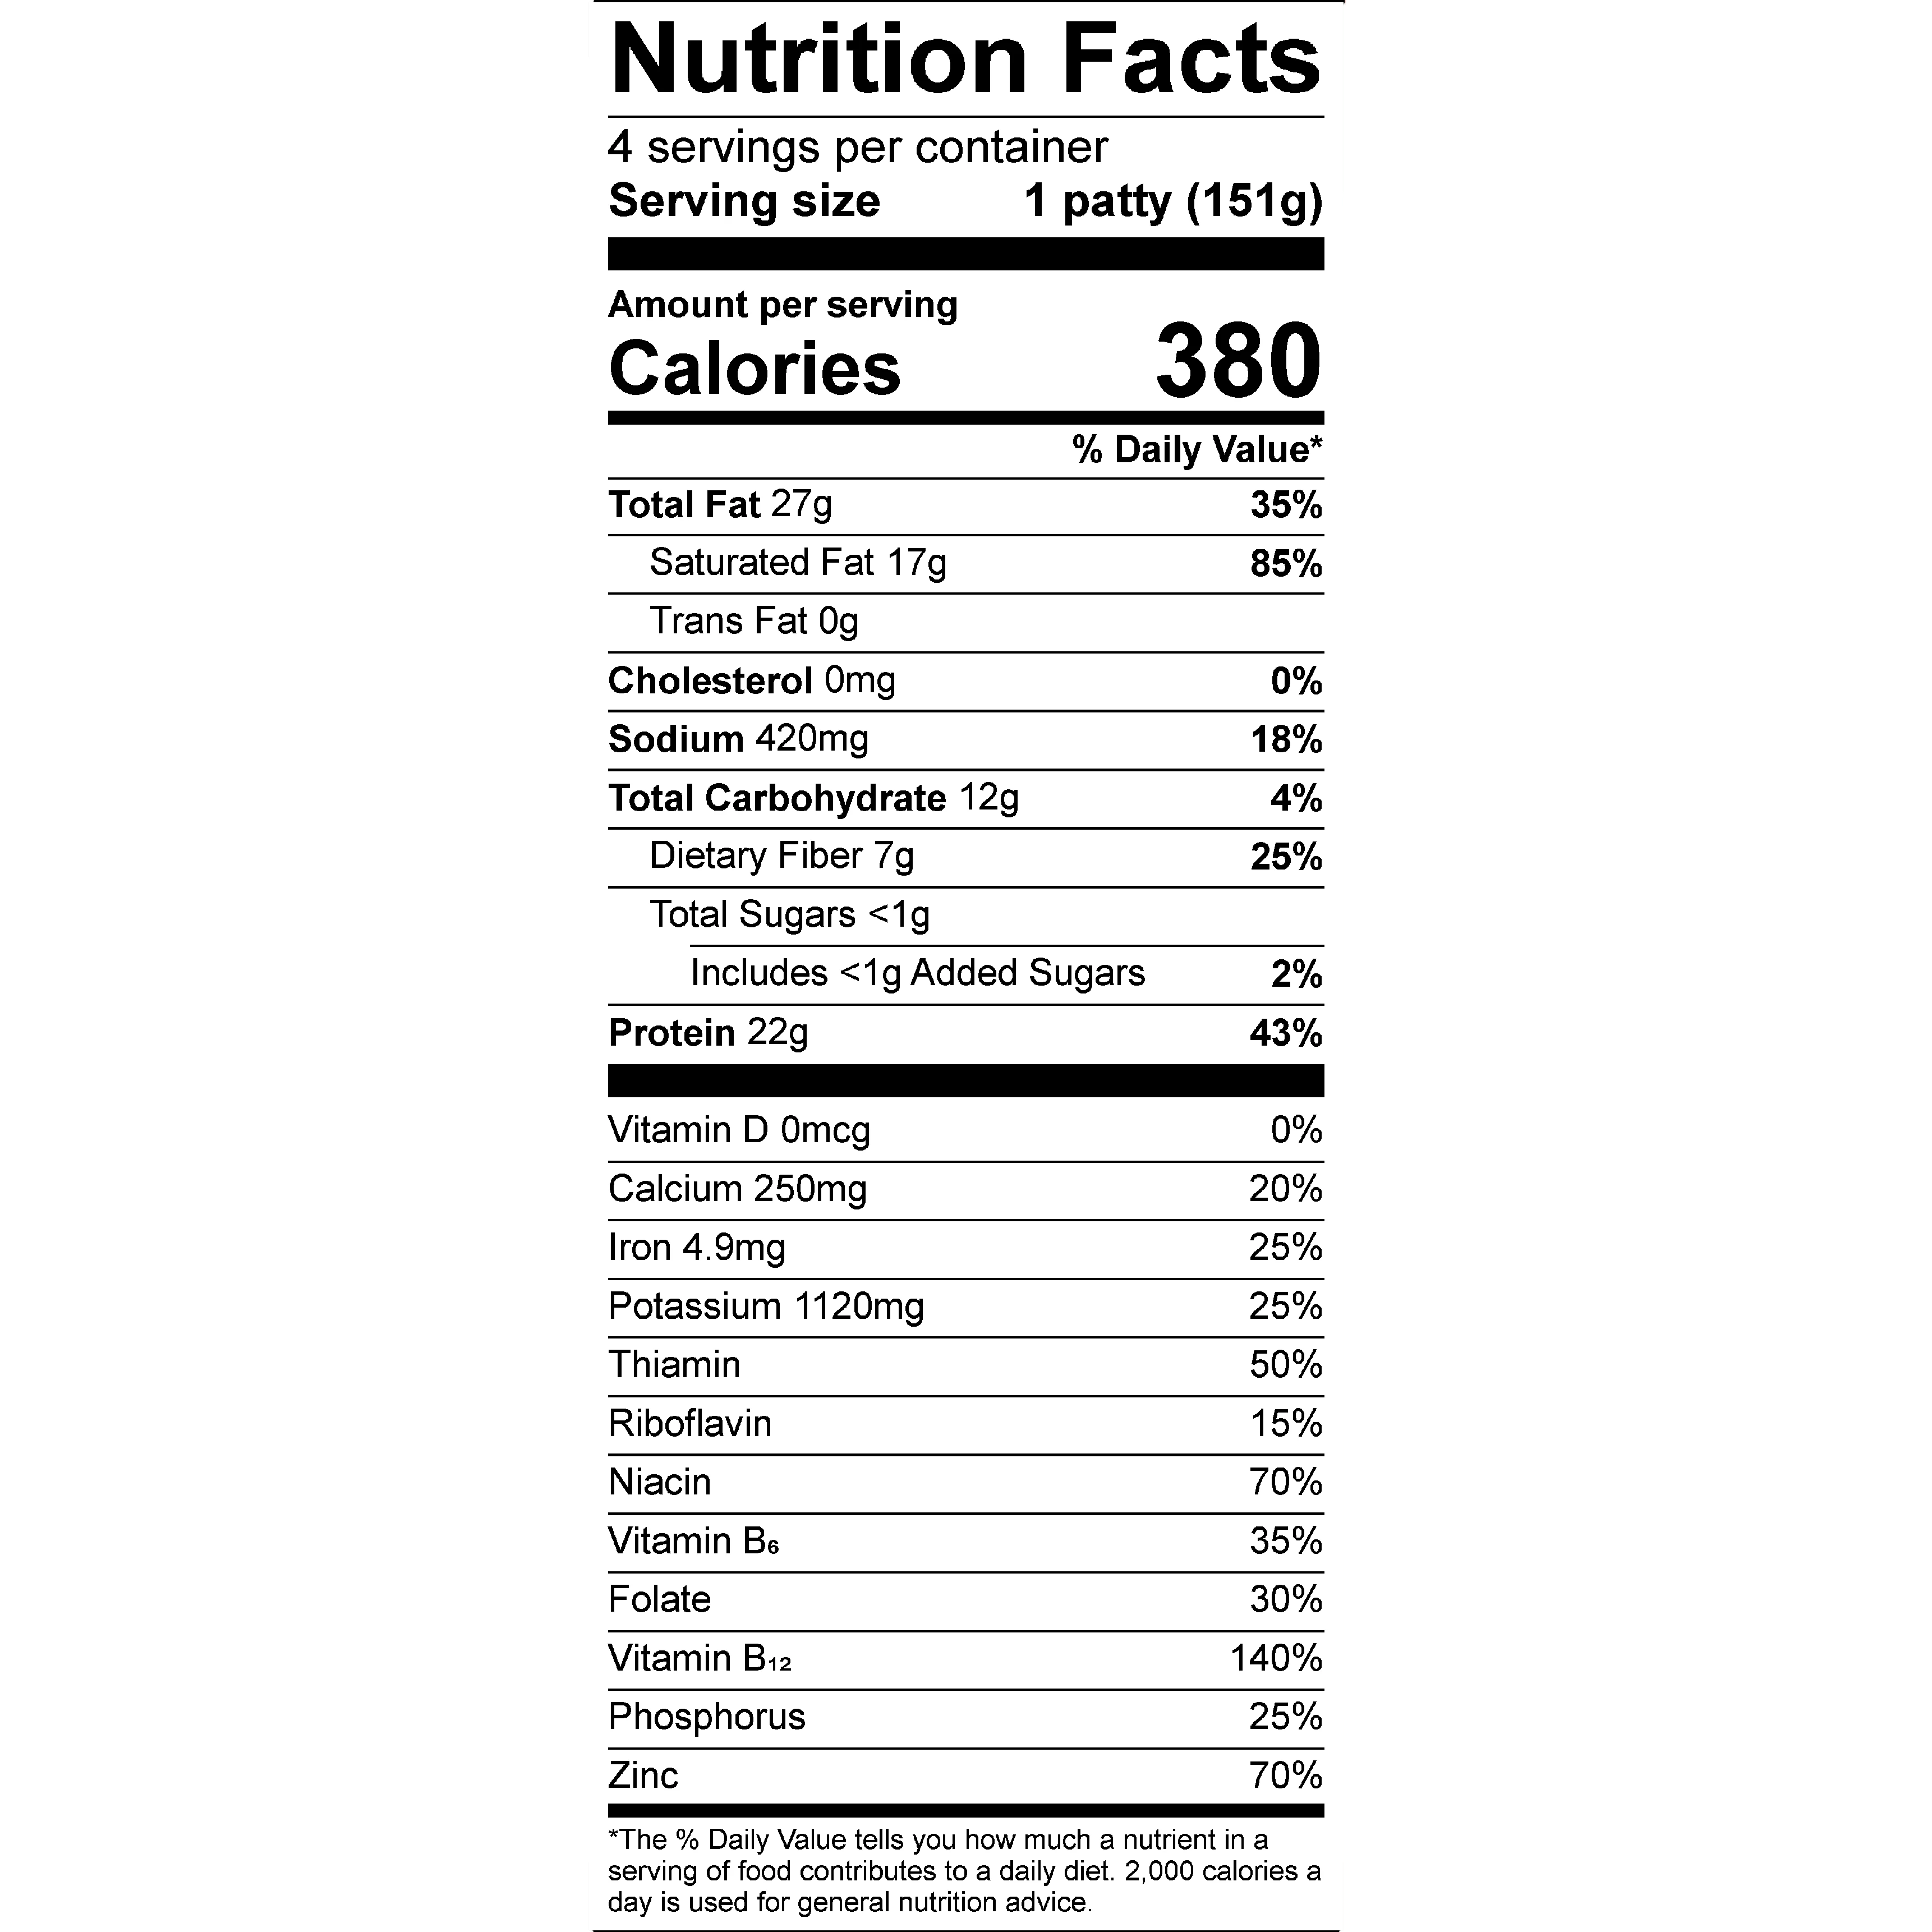 Nutrition facts panel for Impossible Beef Indulgent Patty, Frozen